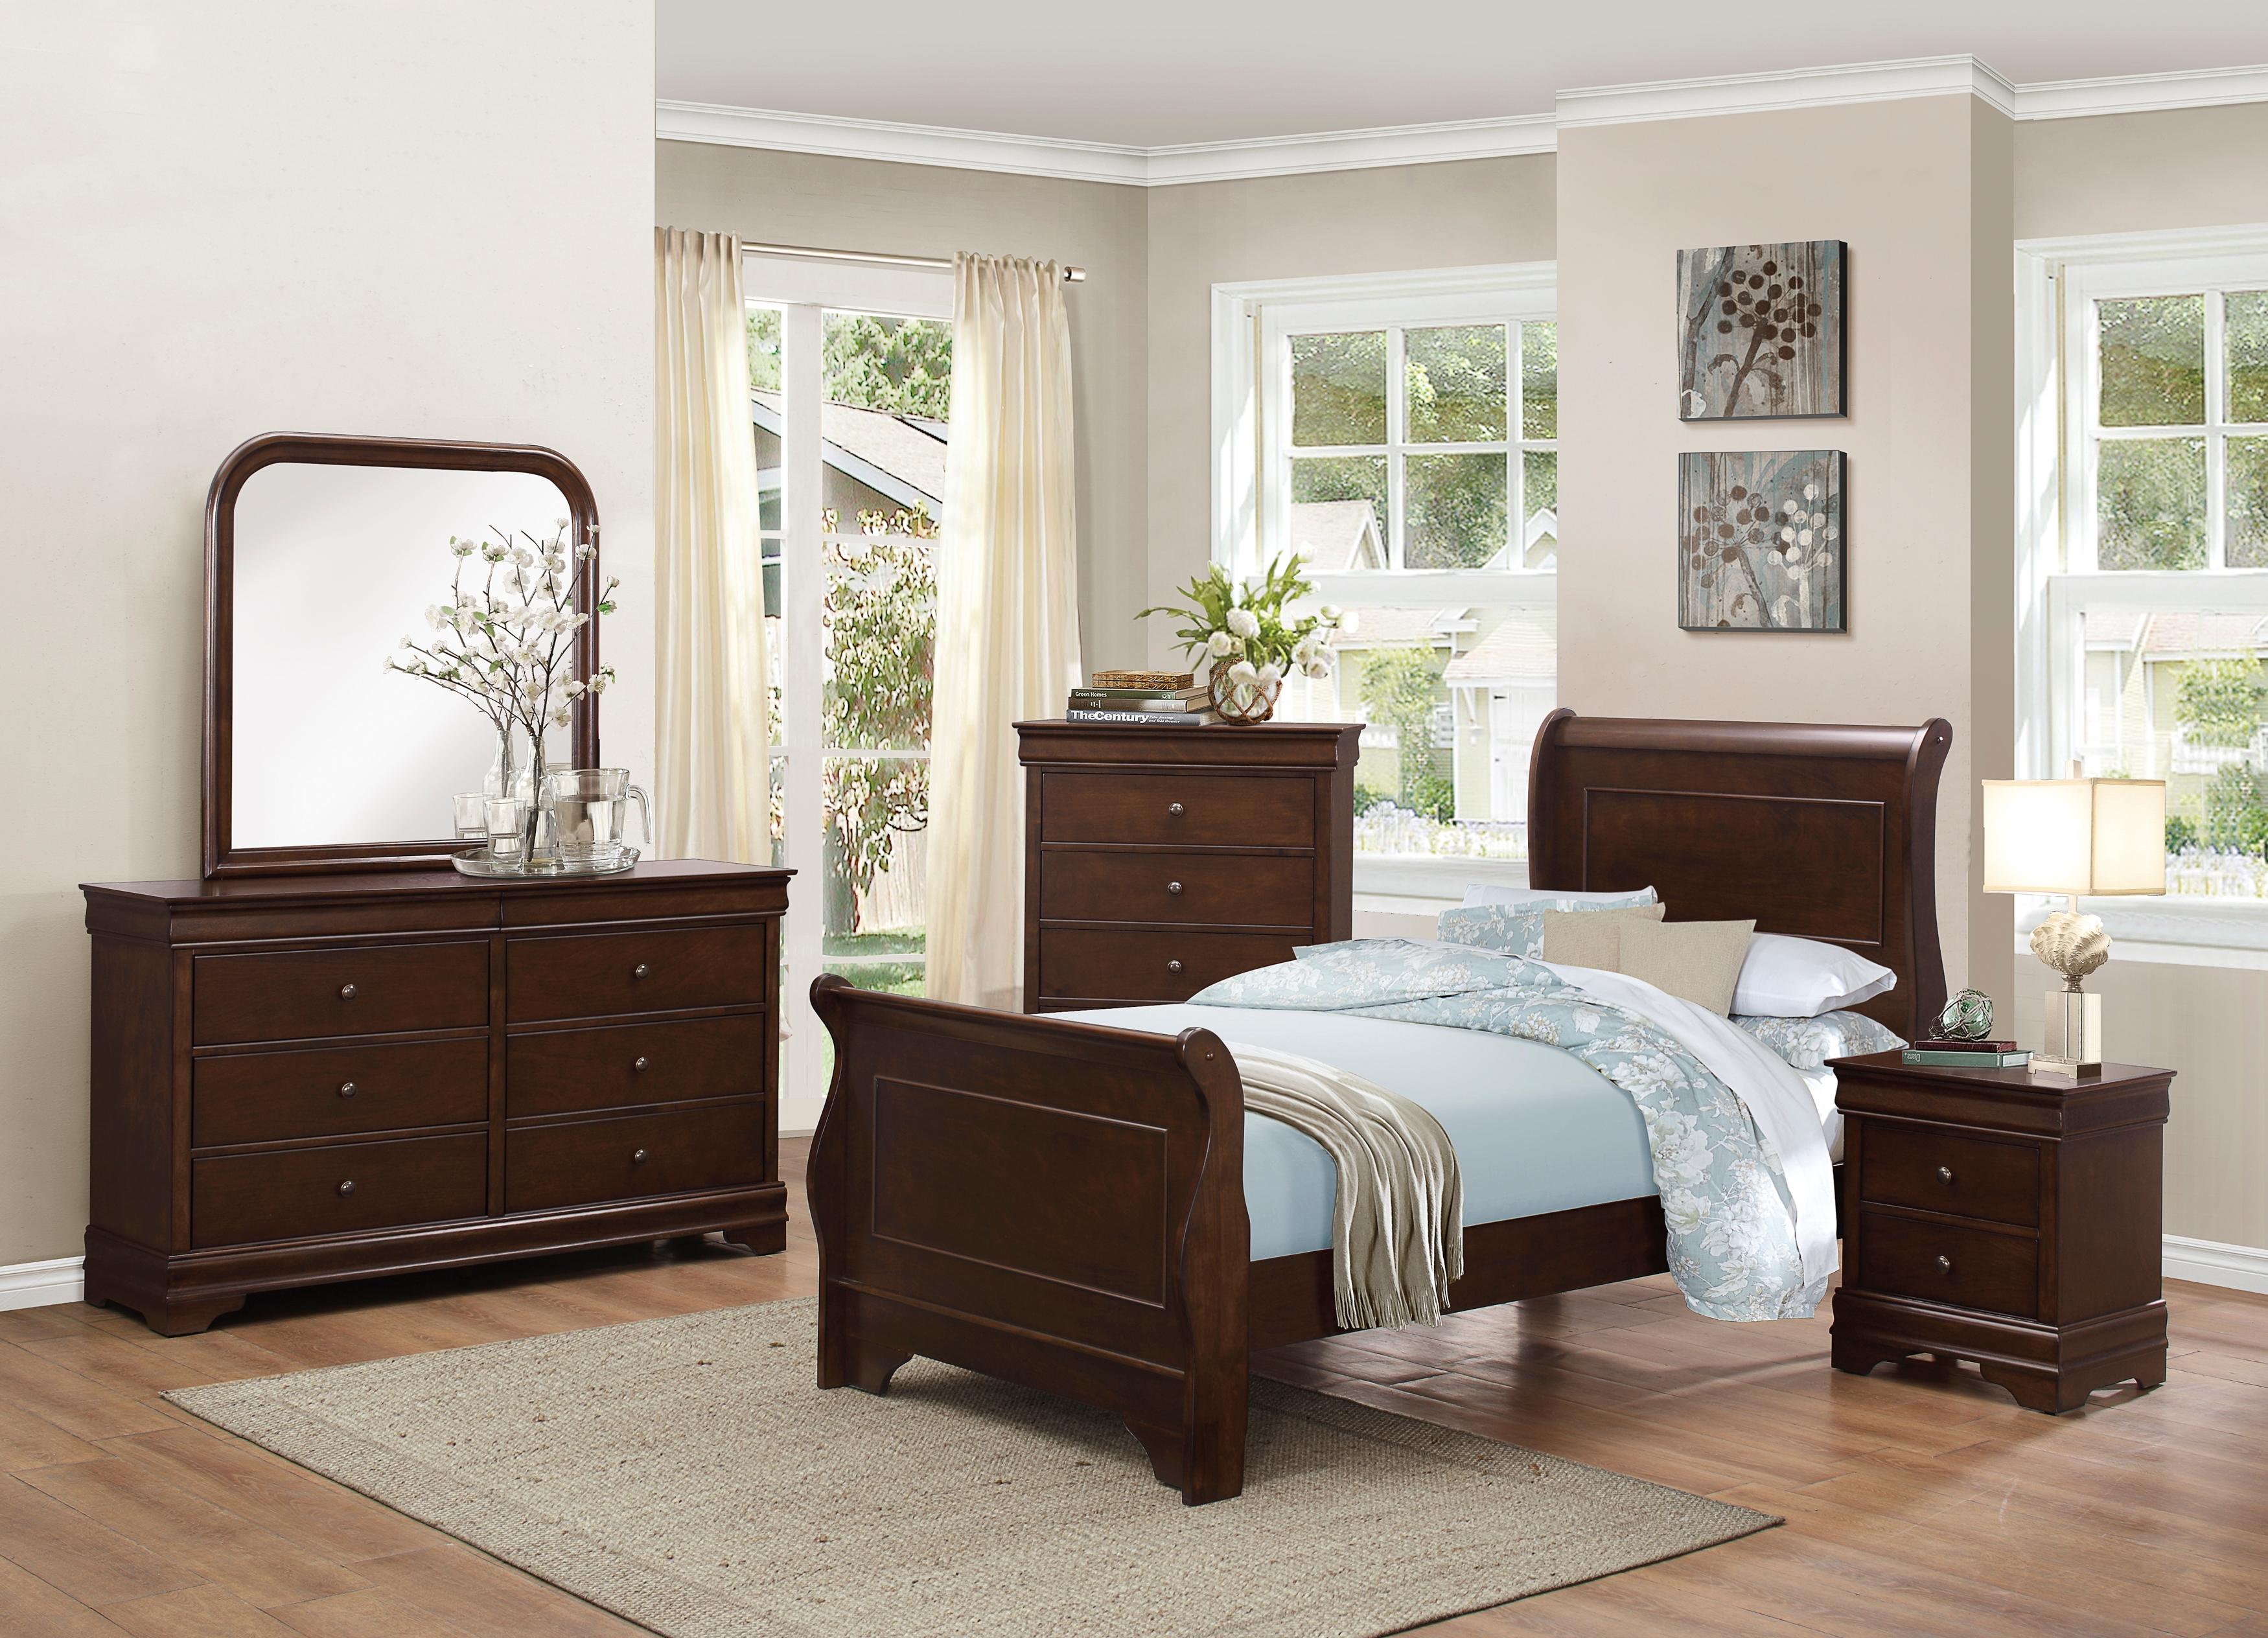 

    
Glam Brown Cherry Wood Twin Bedroom Set 6pcs Homelegance 1856T-1* Abbeville
